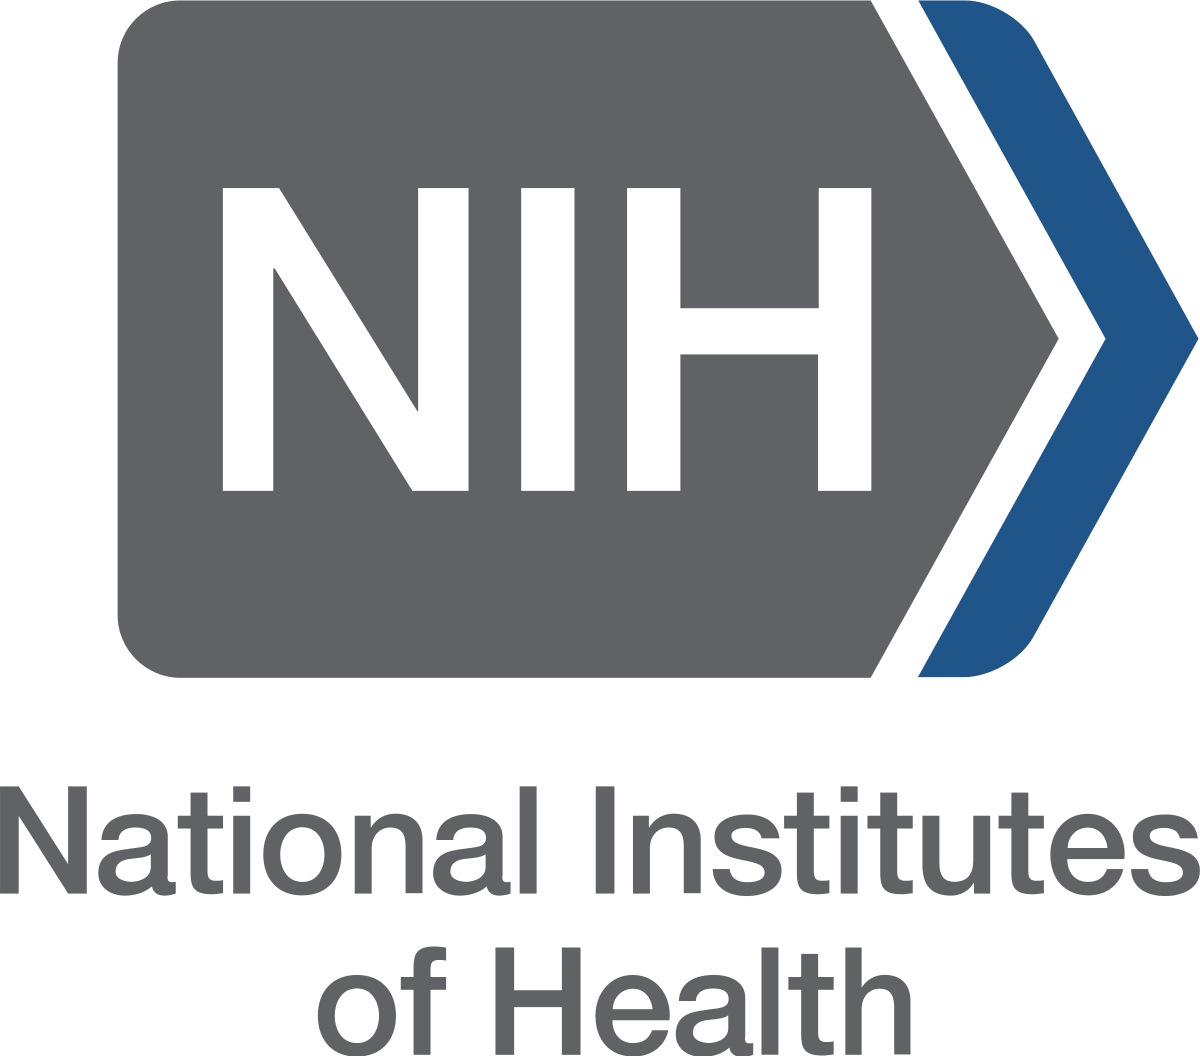 Arkstone’s Treatment Recommendations Now Include Realtime National Institutes of Health (NIH) Data